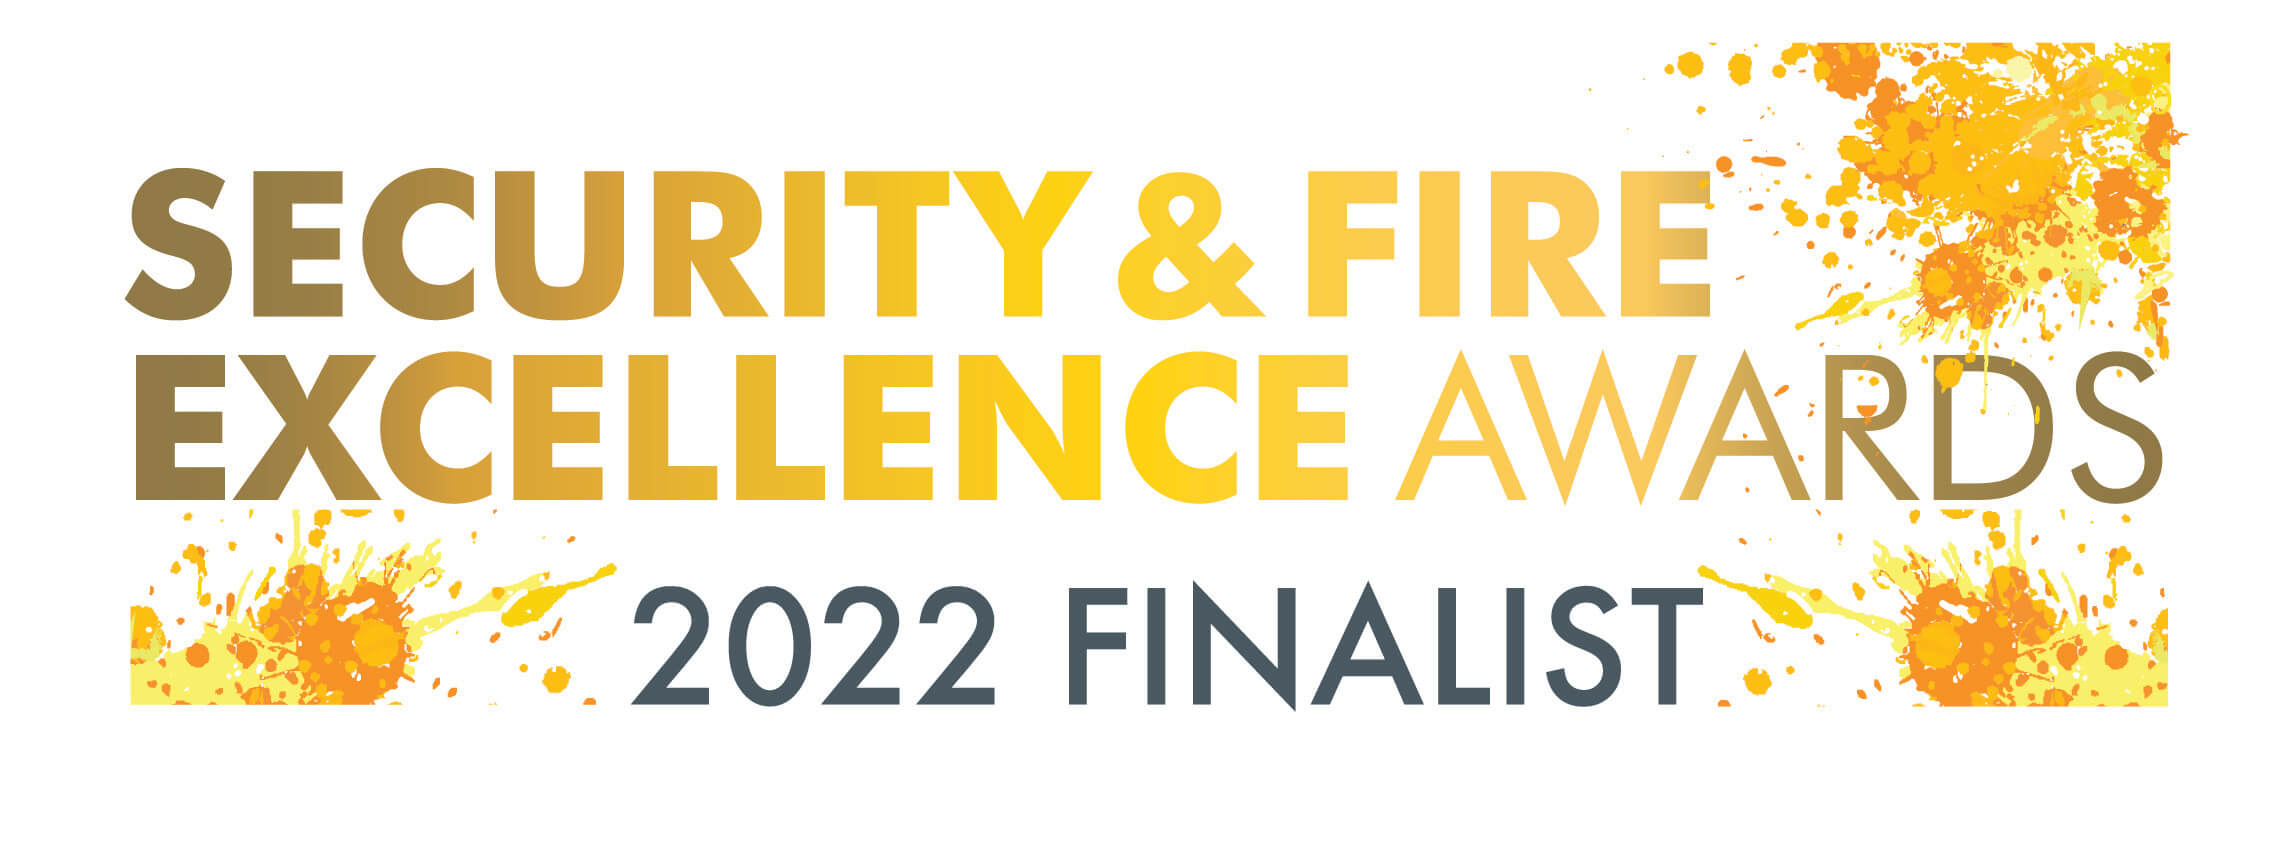 security, security industry, security awards, awards, security & fire excellence awards, 2022, security consultancy, finalist